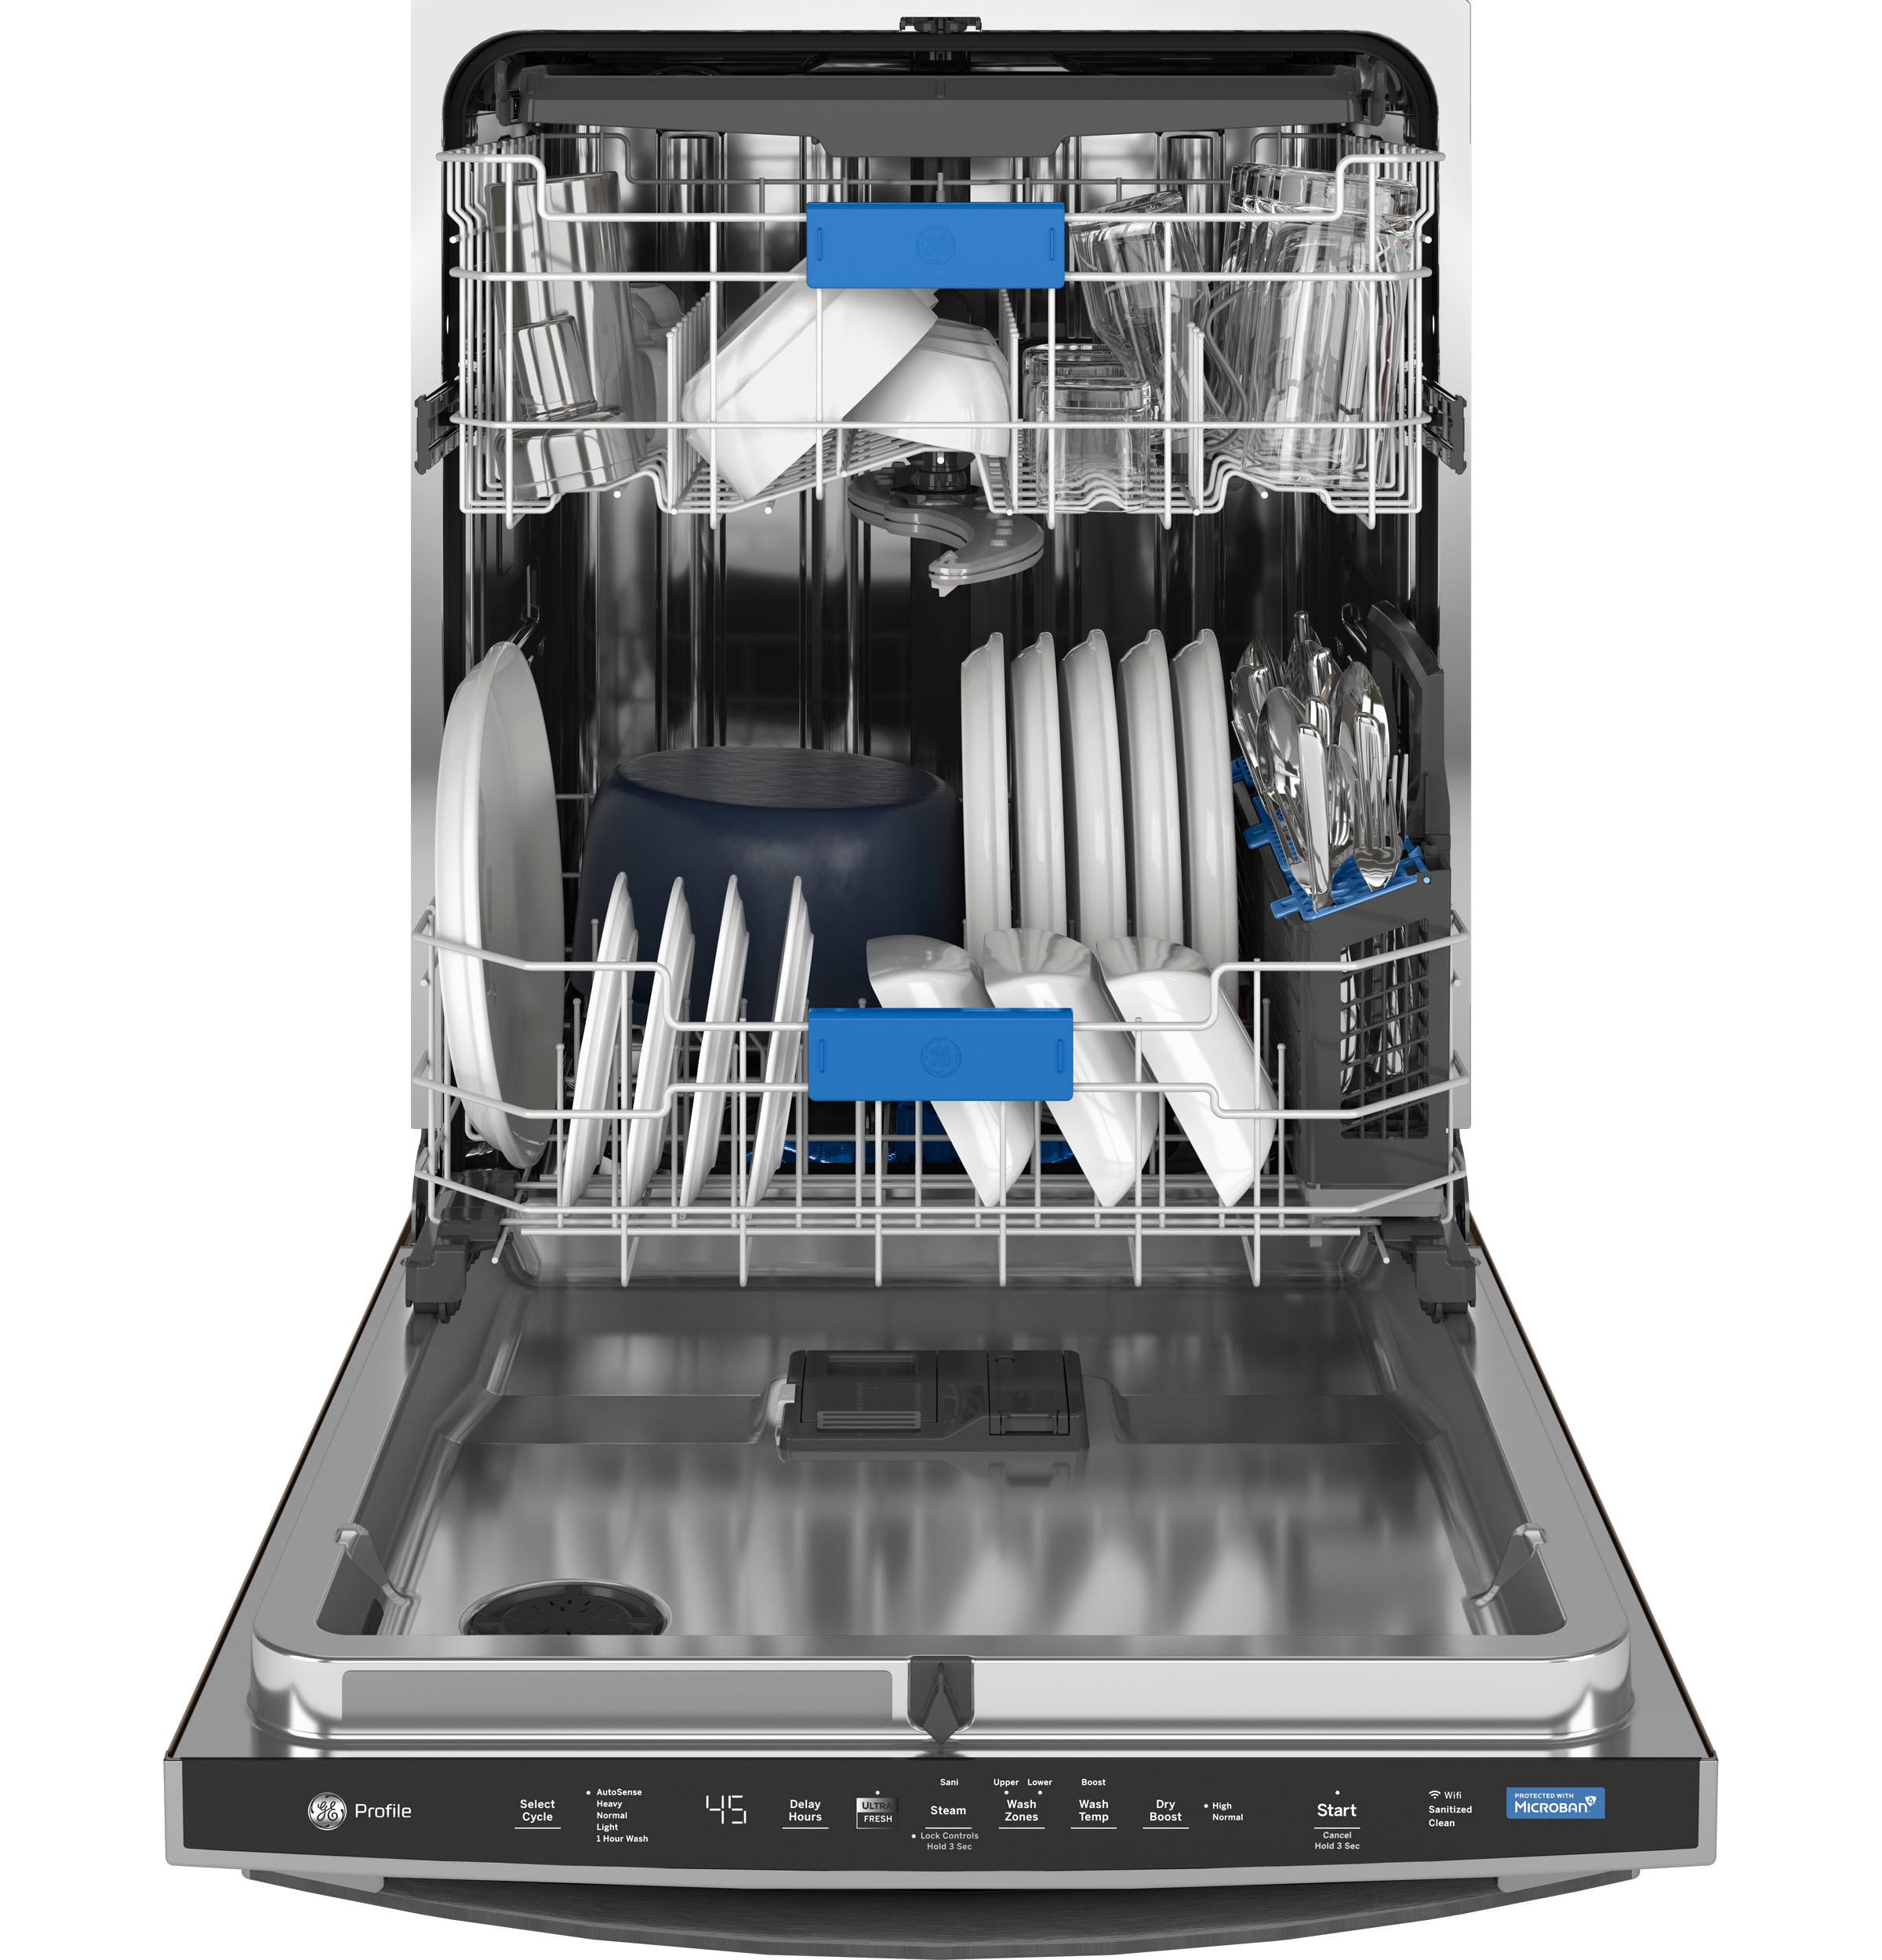 GE Profile™ ENERGY STAR® UltraFresh System Dishwasher with Stainless Steel Interior